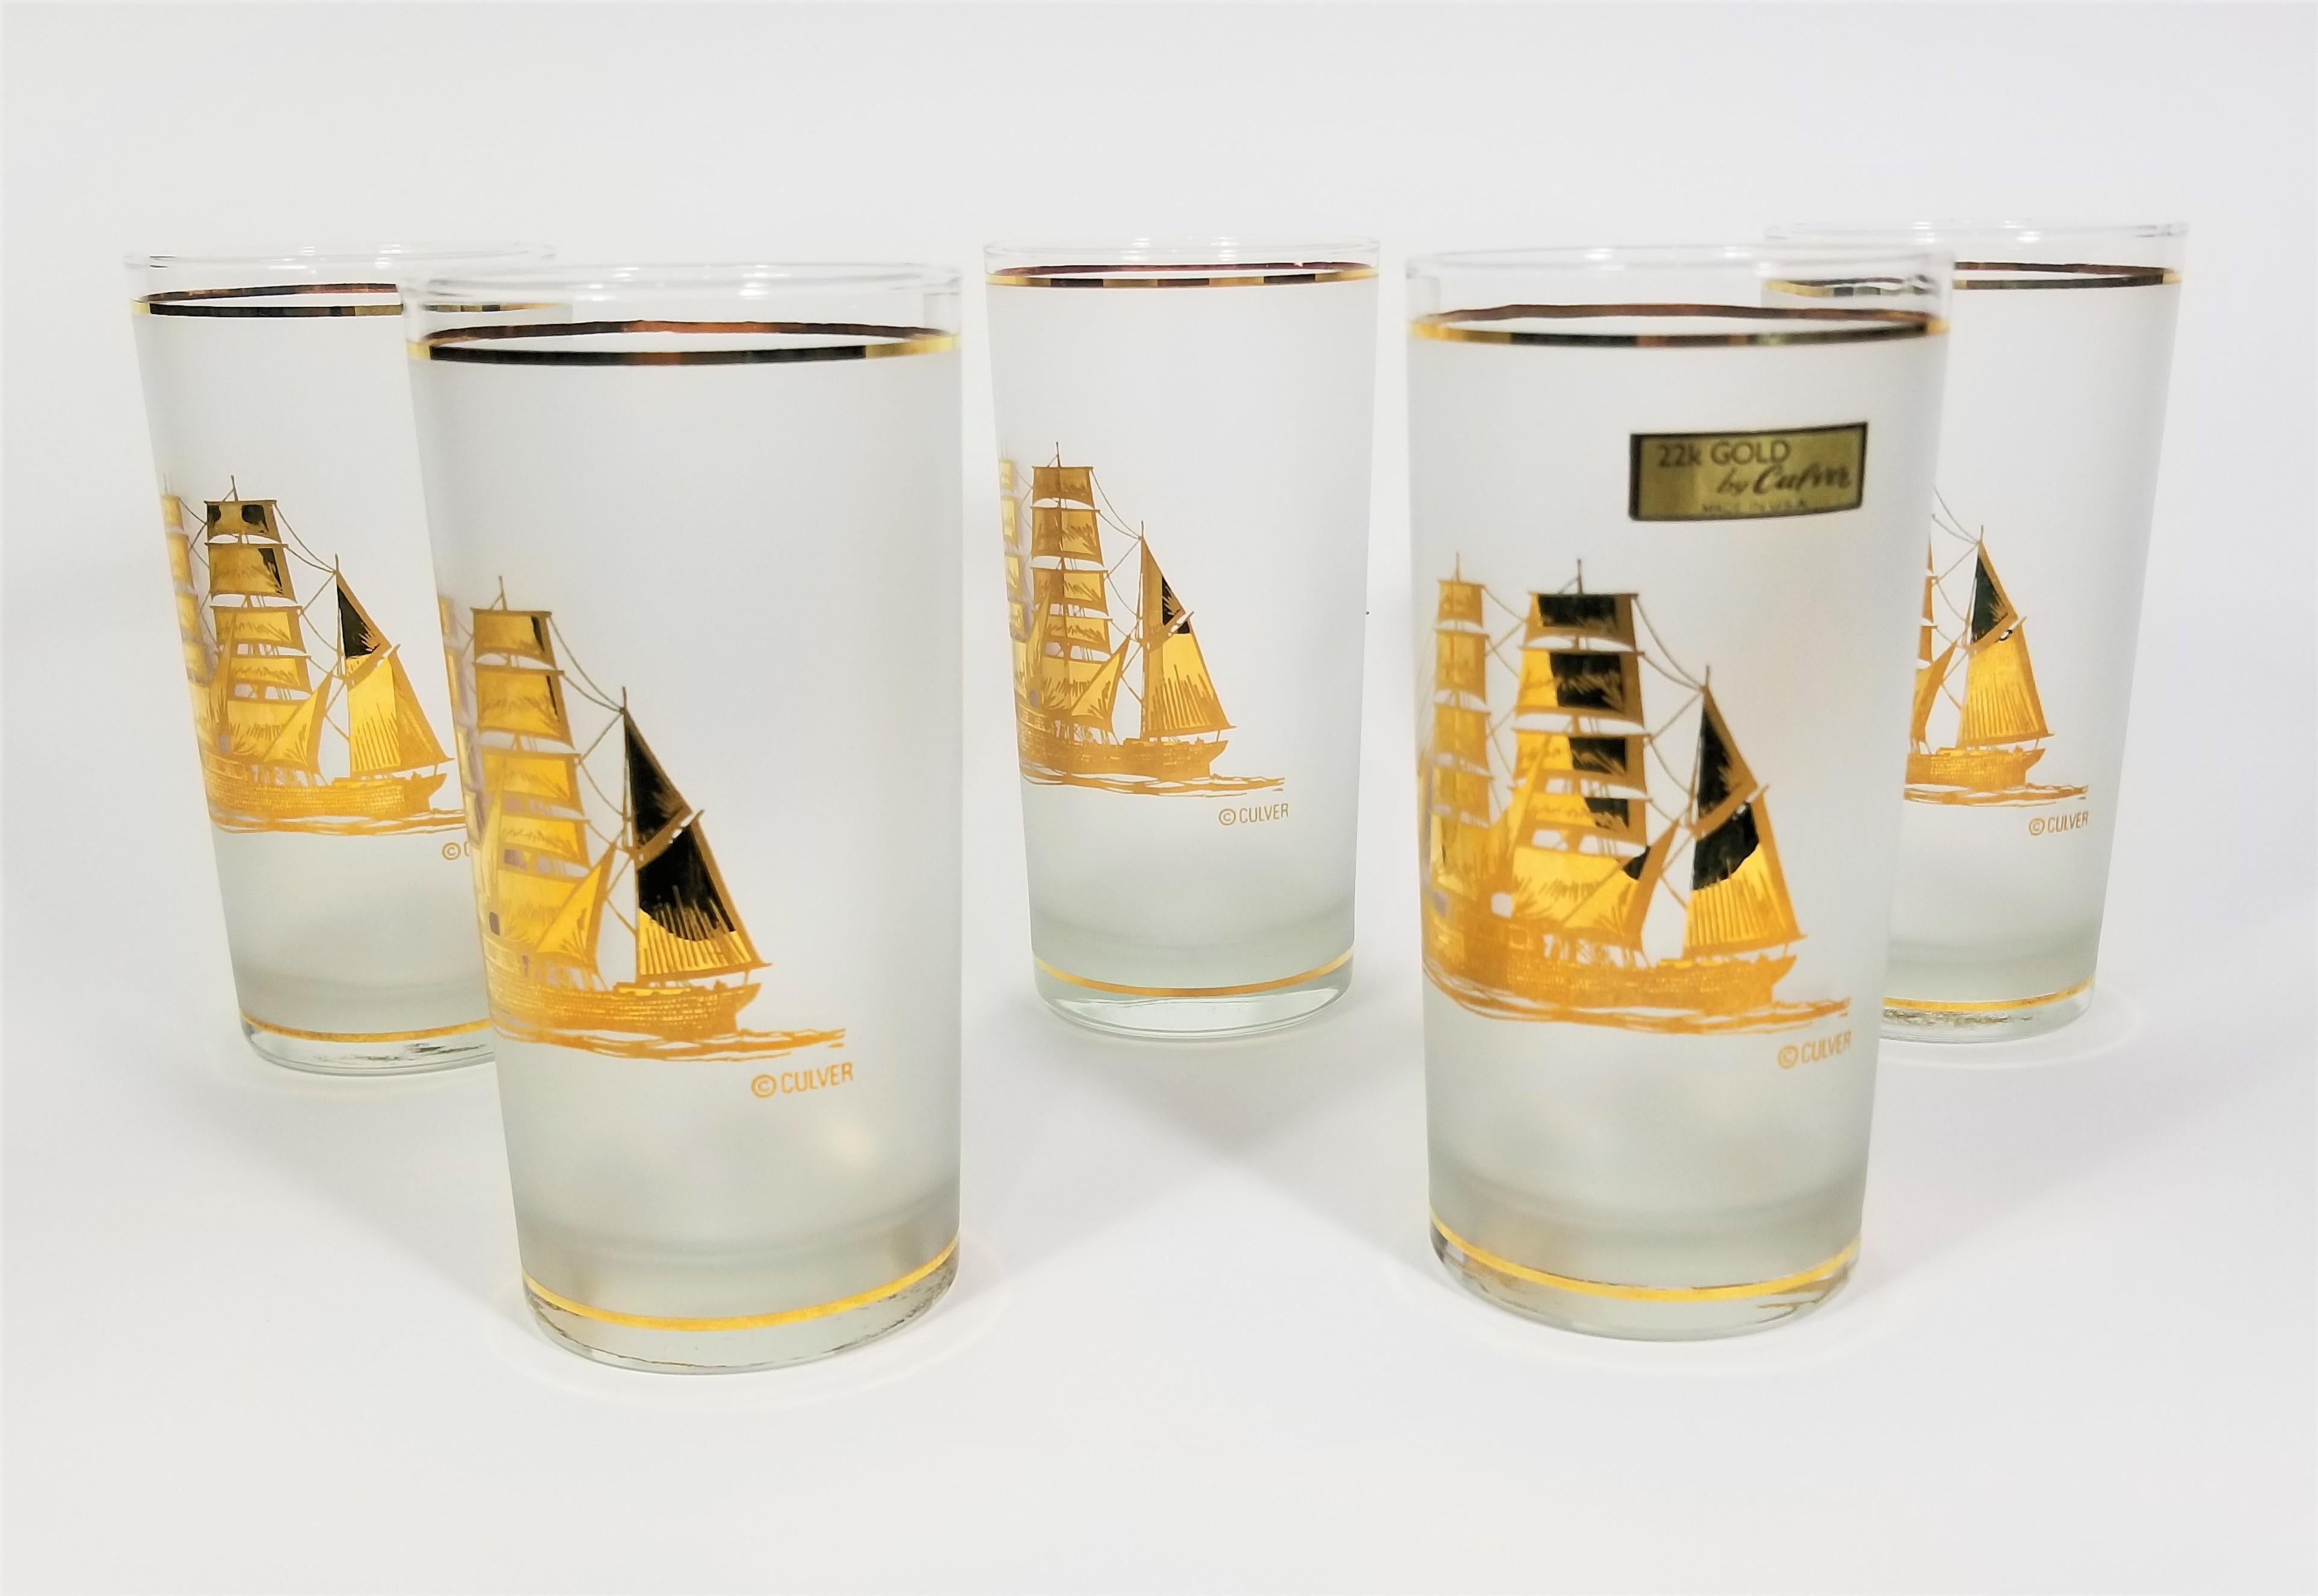 Culver 22K Glassware Barware Schooner Ship on Frosted Glass. Still retains original marking sticker. All glasses are Signed and in Excellent Condition. 